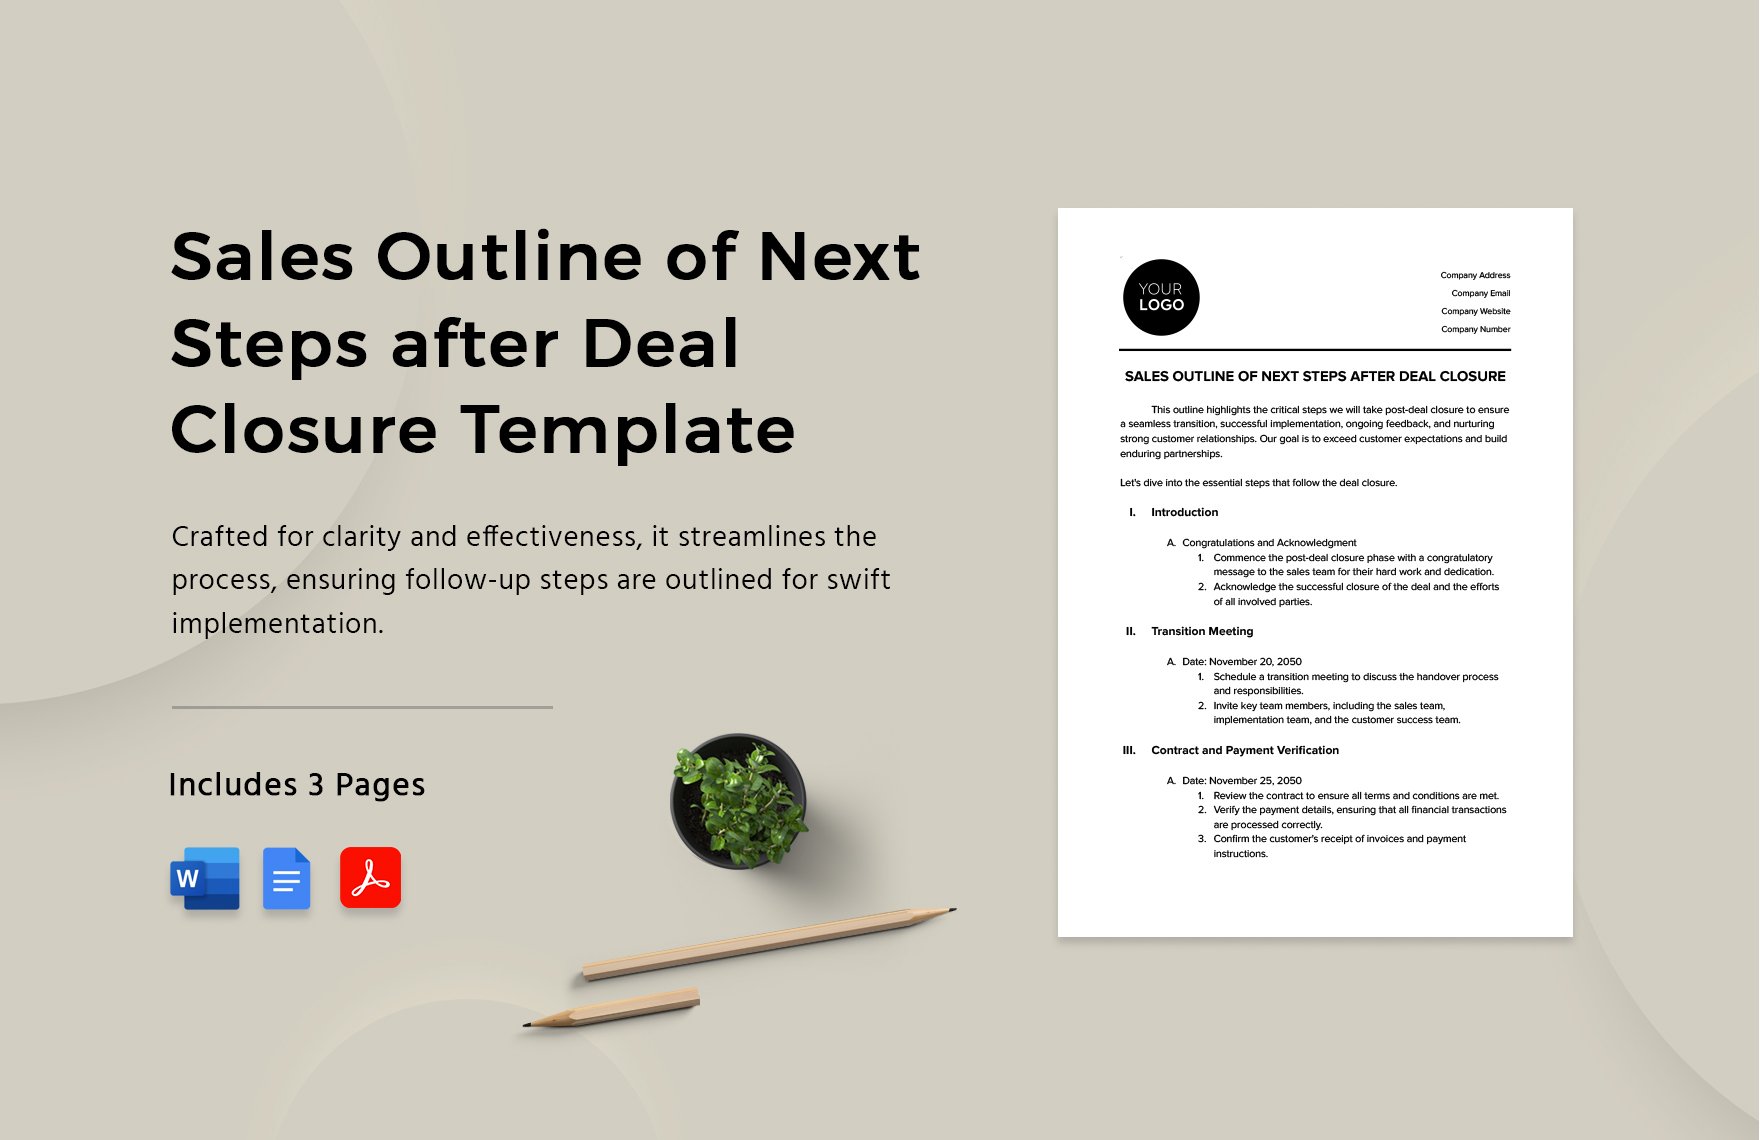 Sales Outline of Next Steps after Deal Closure Template in Word, Google Docs, PDF